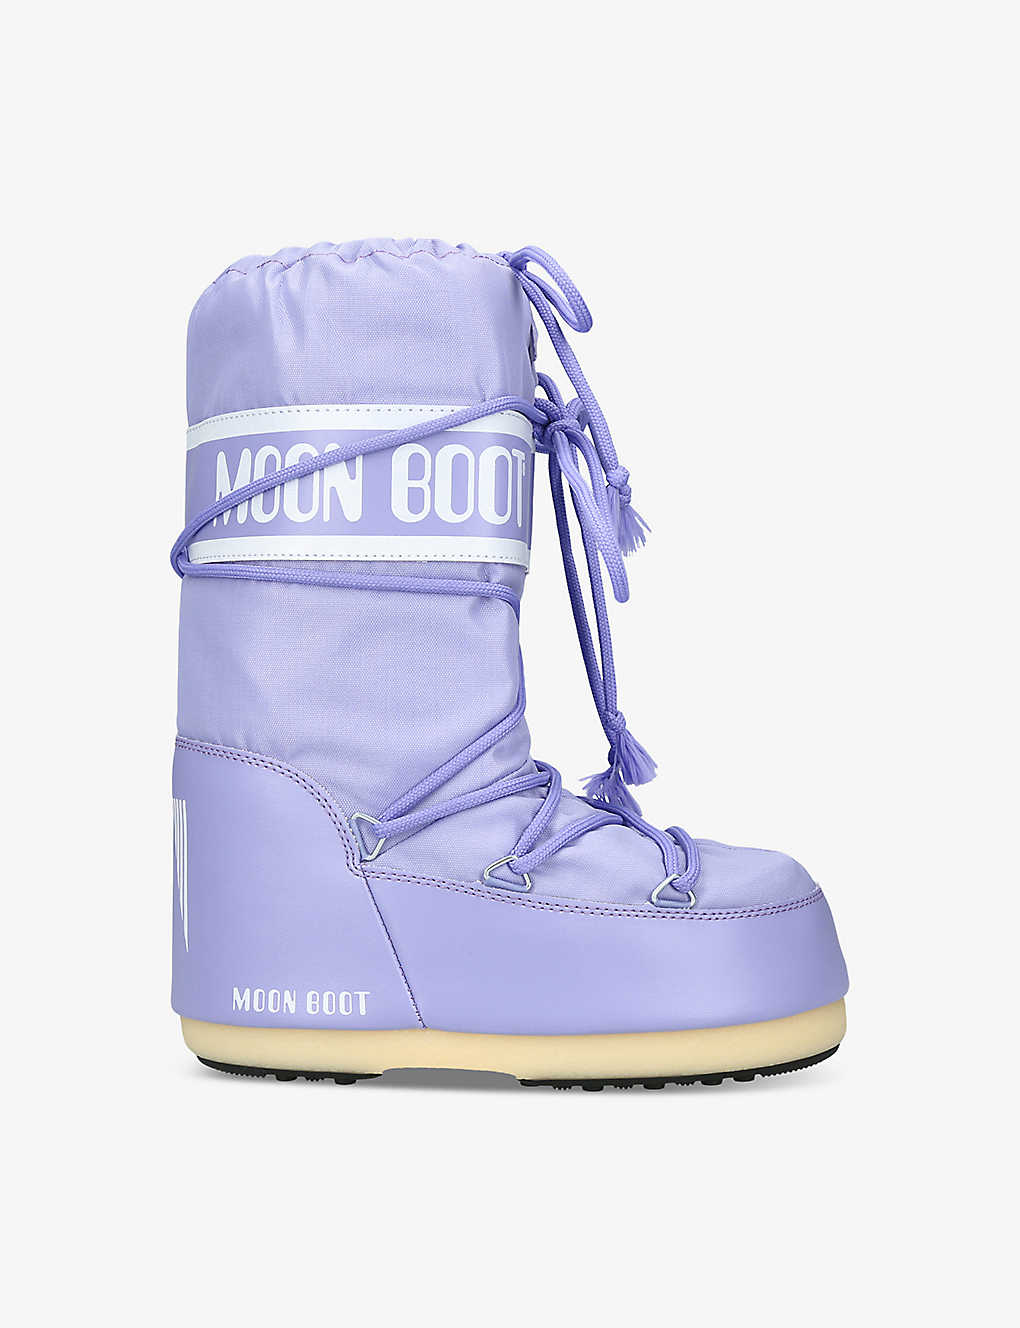 MOON BOOT MOON BOOT GIRLS LILAC KIDS ICON JUNIOR BRANDED NYLON SNOW BOOTS 3-7 YEARS